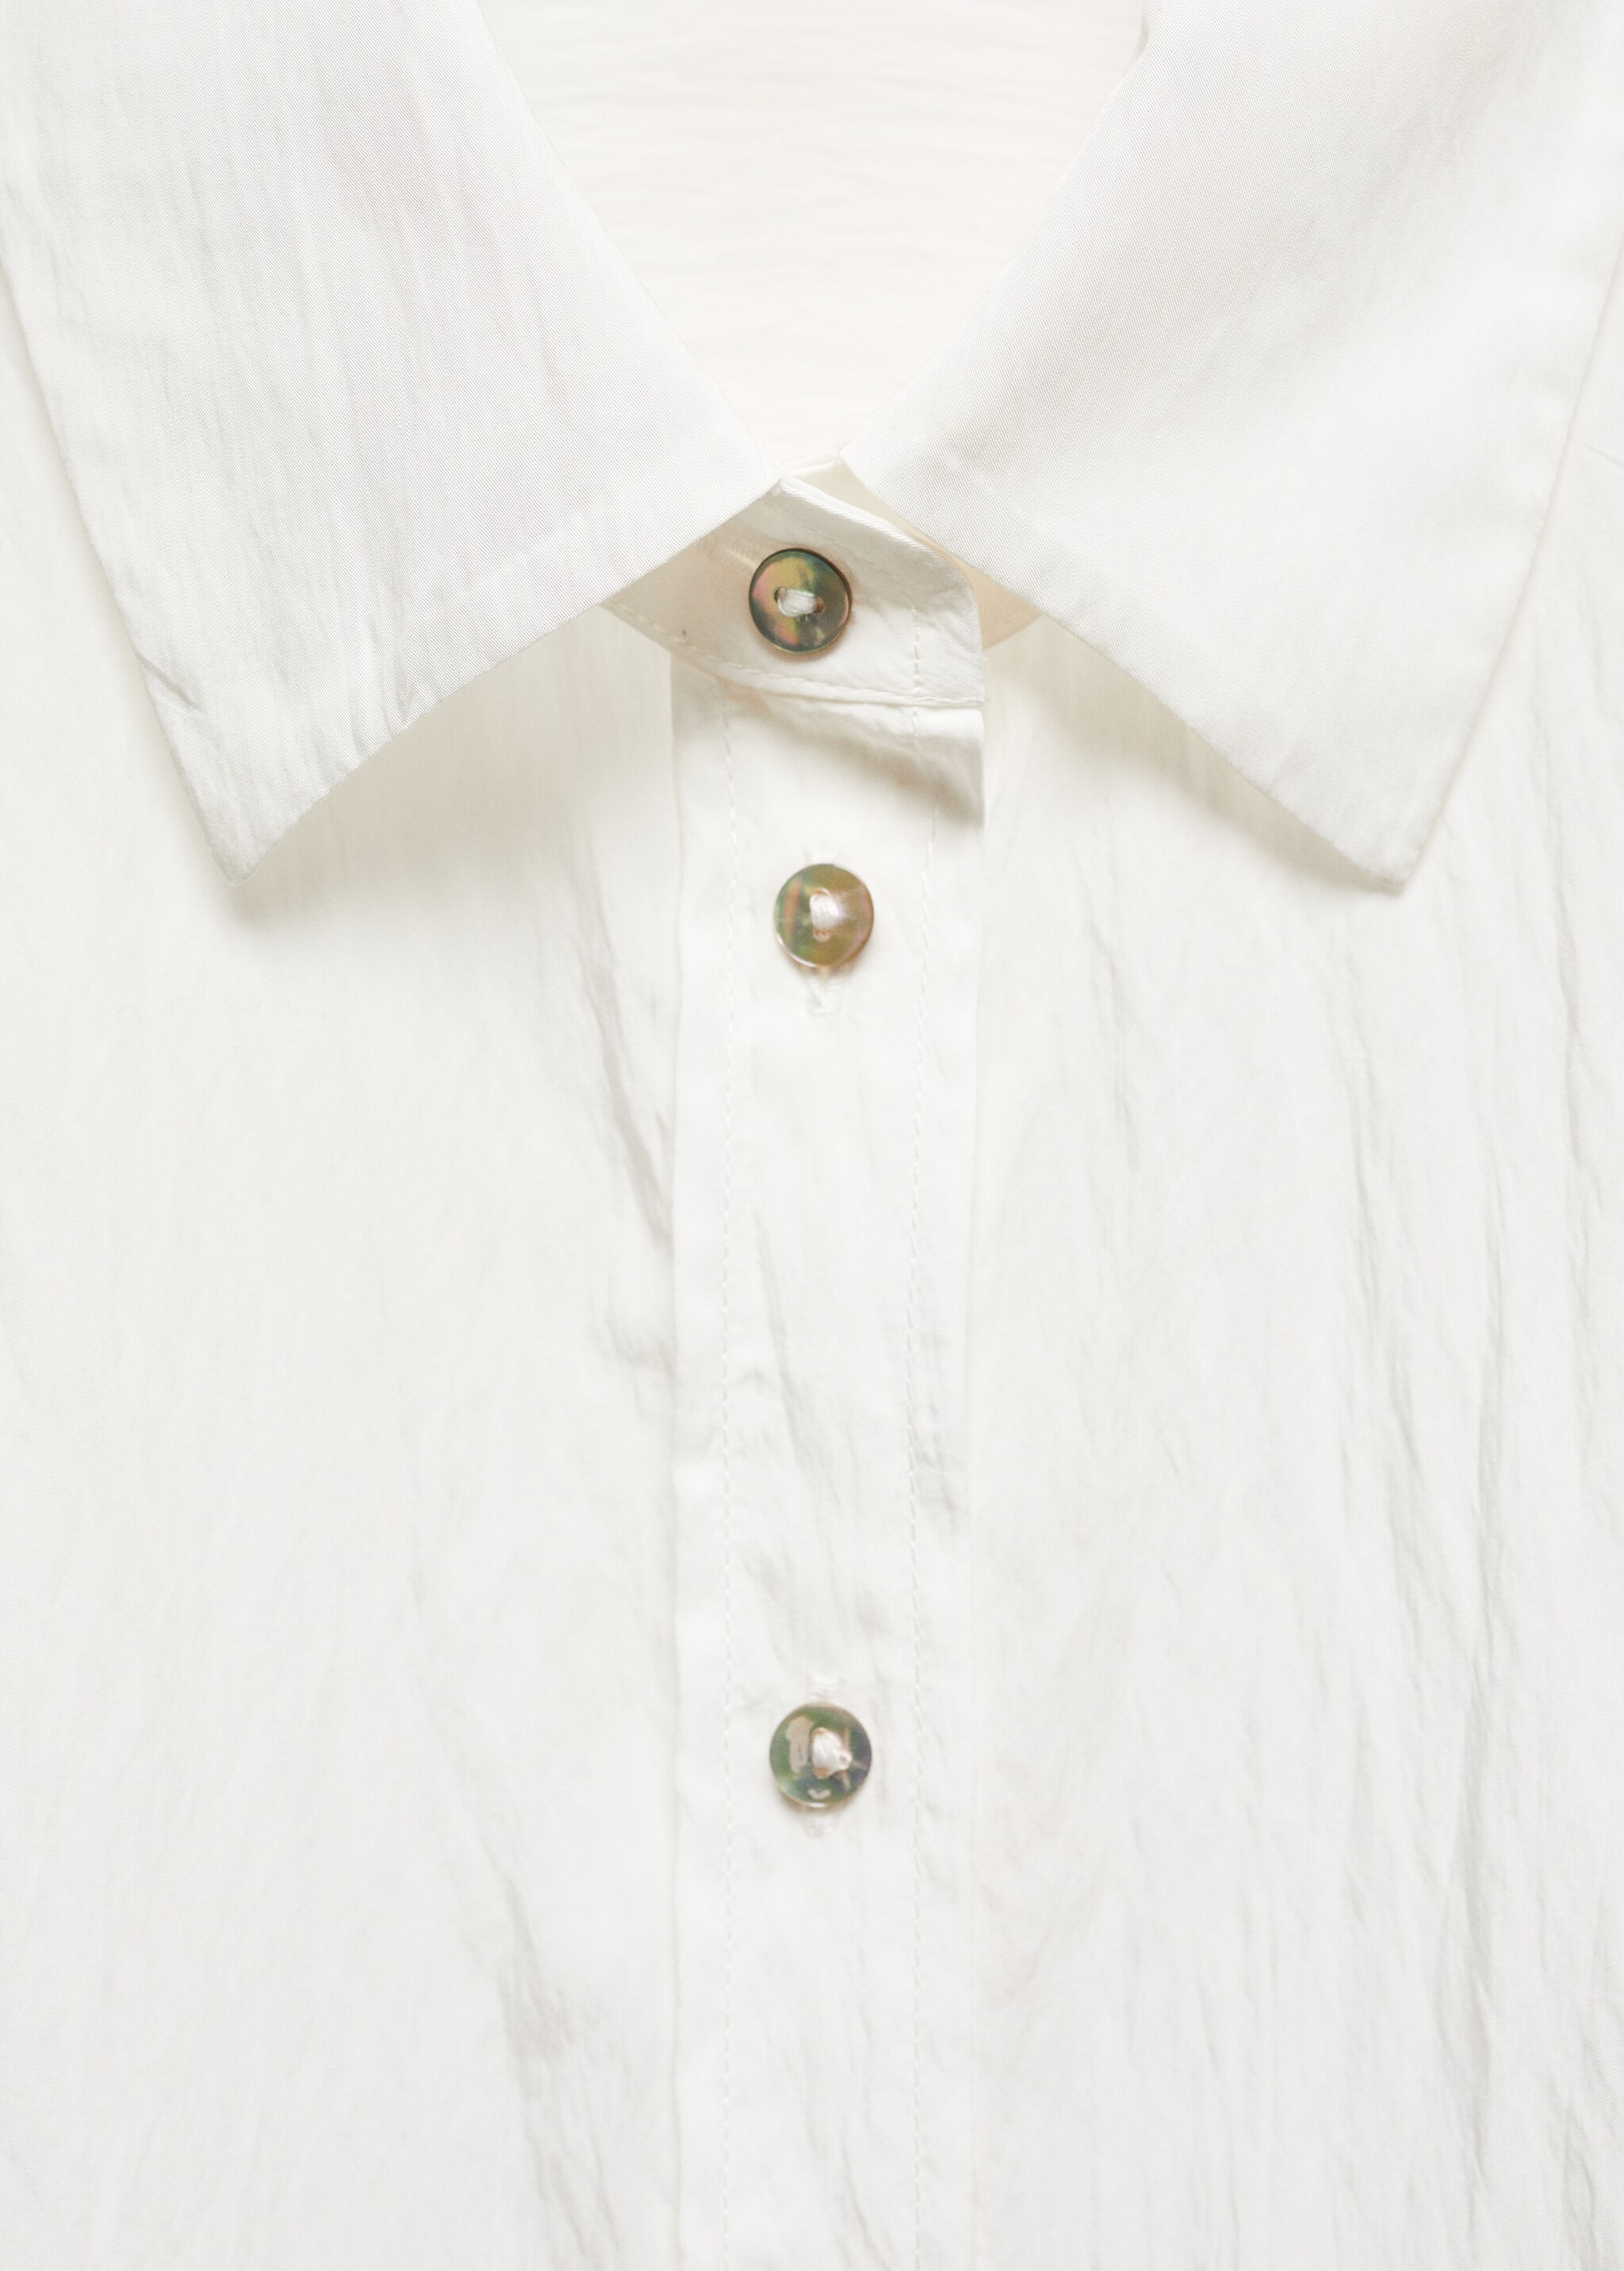 Wrinkled effect shirt - Details of the article 8